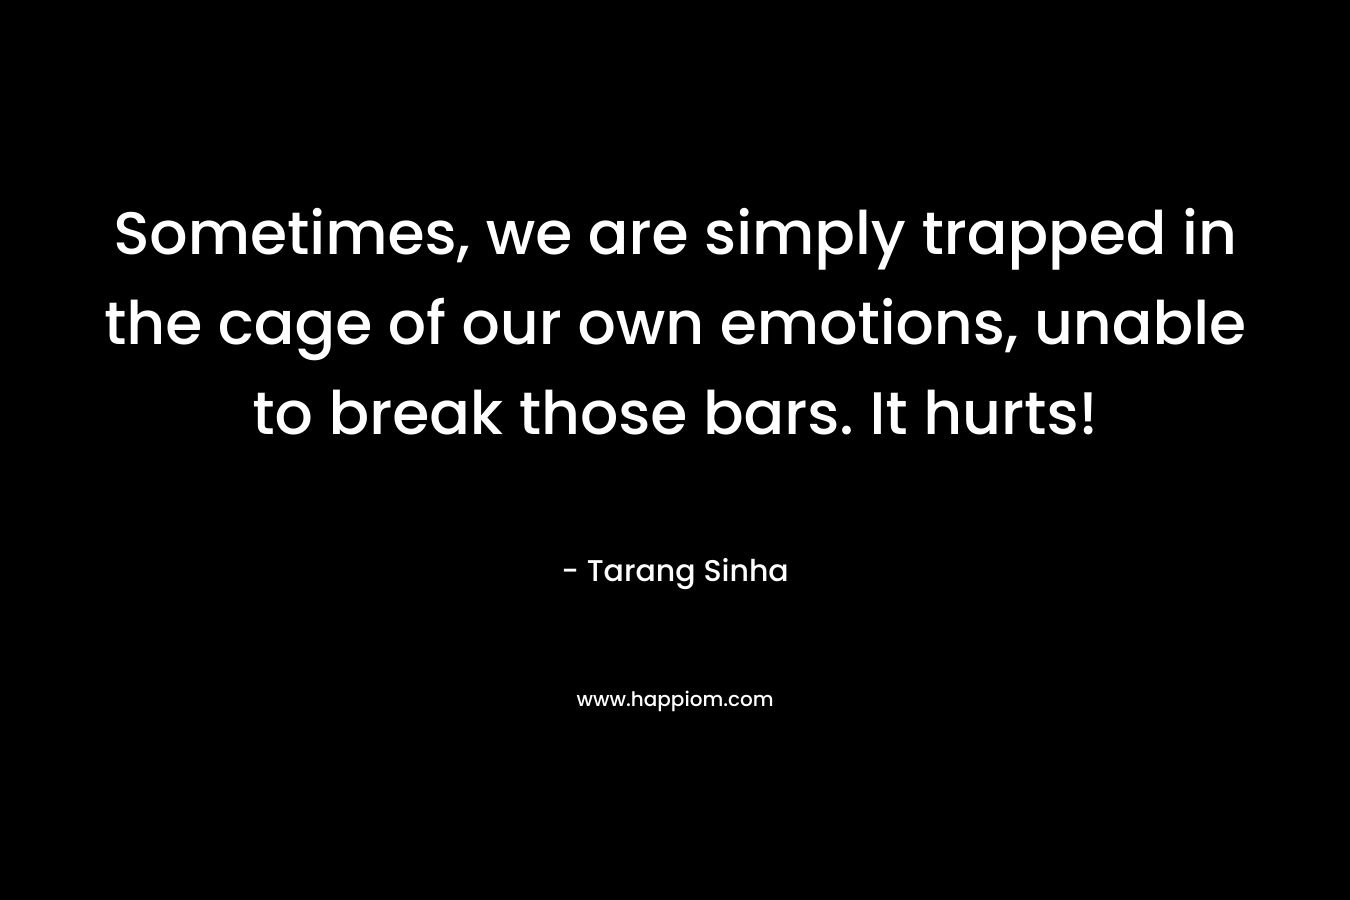 Sometimes, we are simply trapped in the cage of our own emotions, unable to break those bars. It hurts!